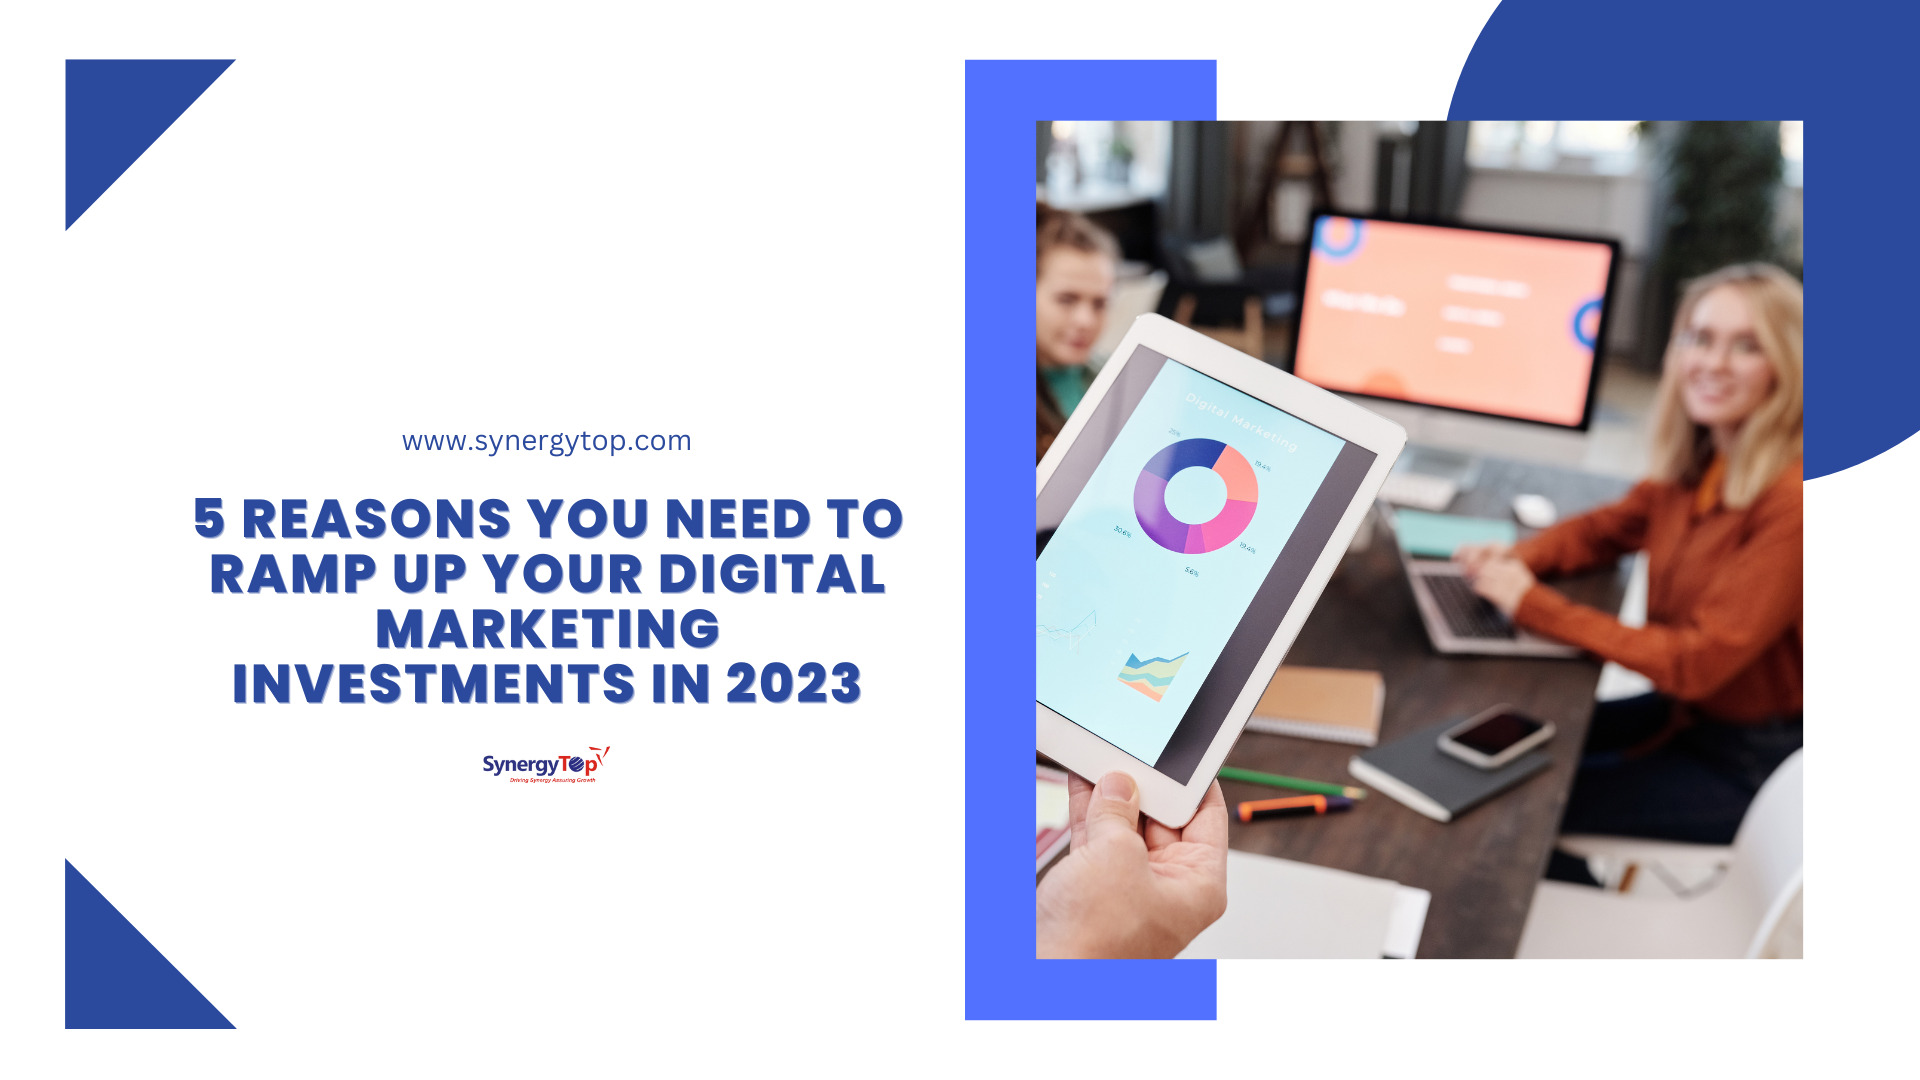 5 Reasons You Need To Ramp Up Your Digital Marketing Investments in 2023 | SynergyTop